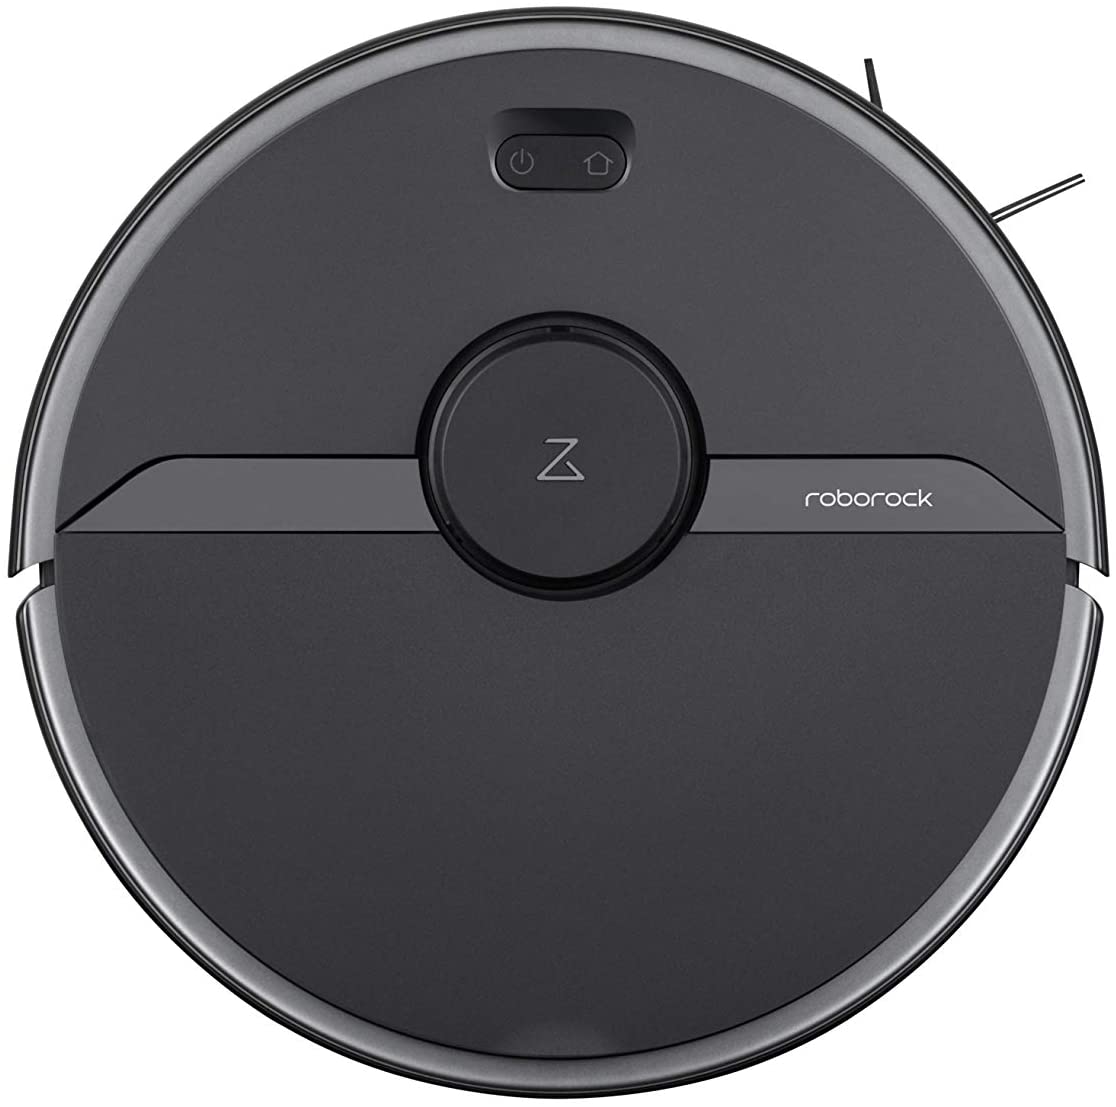 Roborock S6 Pure Robot Vacuum and Mop, Multi-Floor Mapping, Lidar Navigation, No-go Zones, Selective Room Cleaning, Super Strong Suction Robotic Vacuum Cleaner, Wi-Fi Connected, Alexa Voice Control